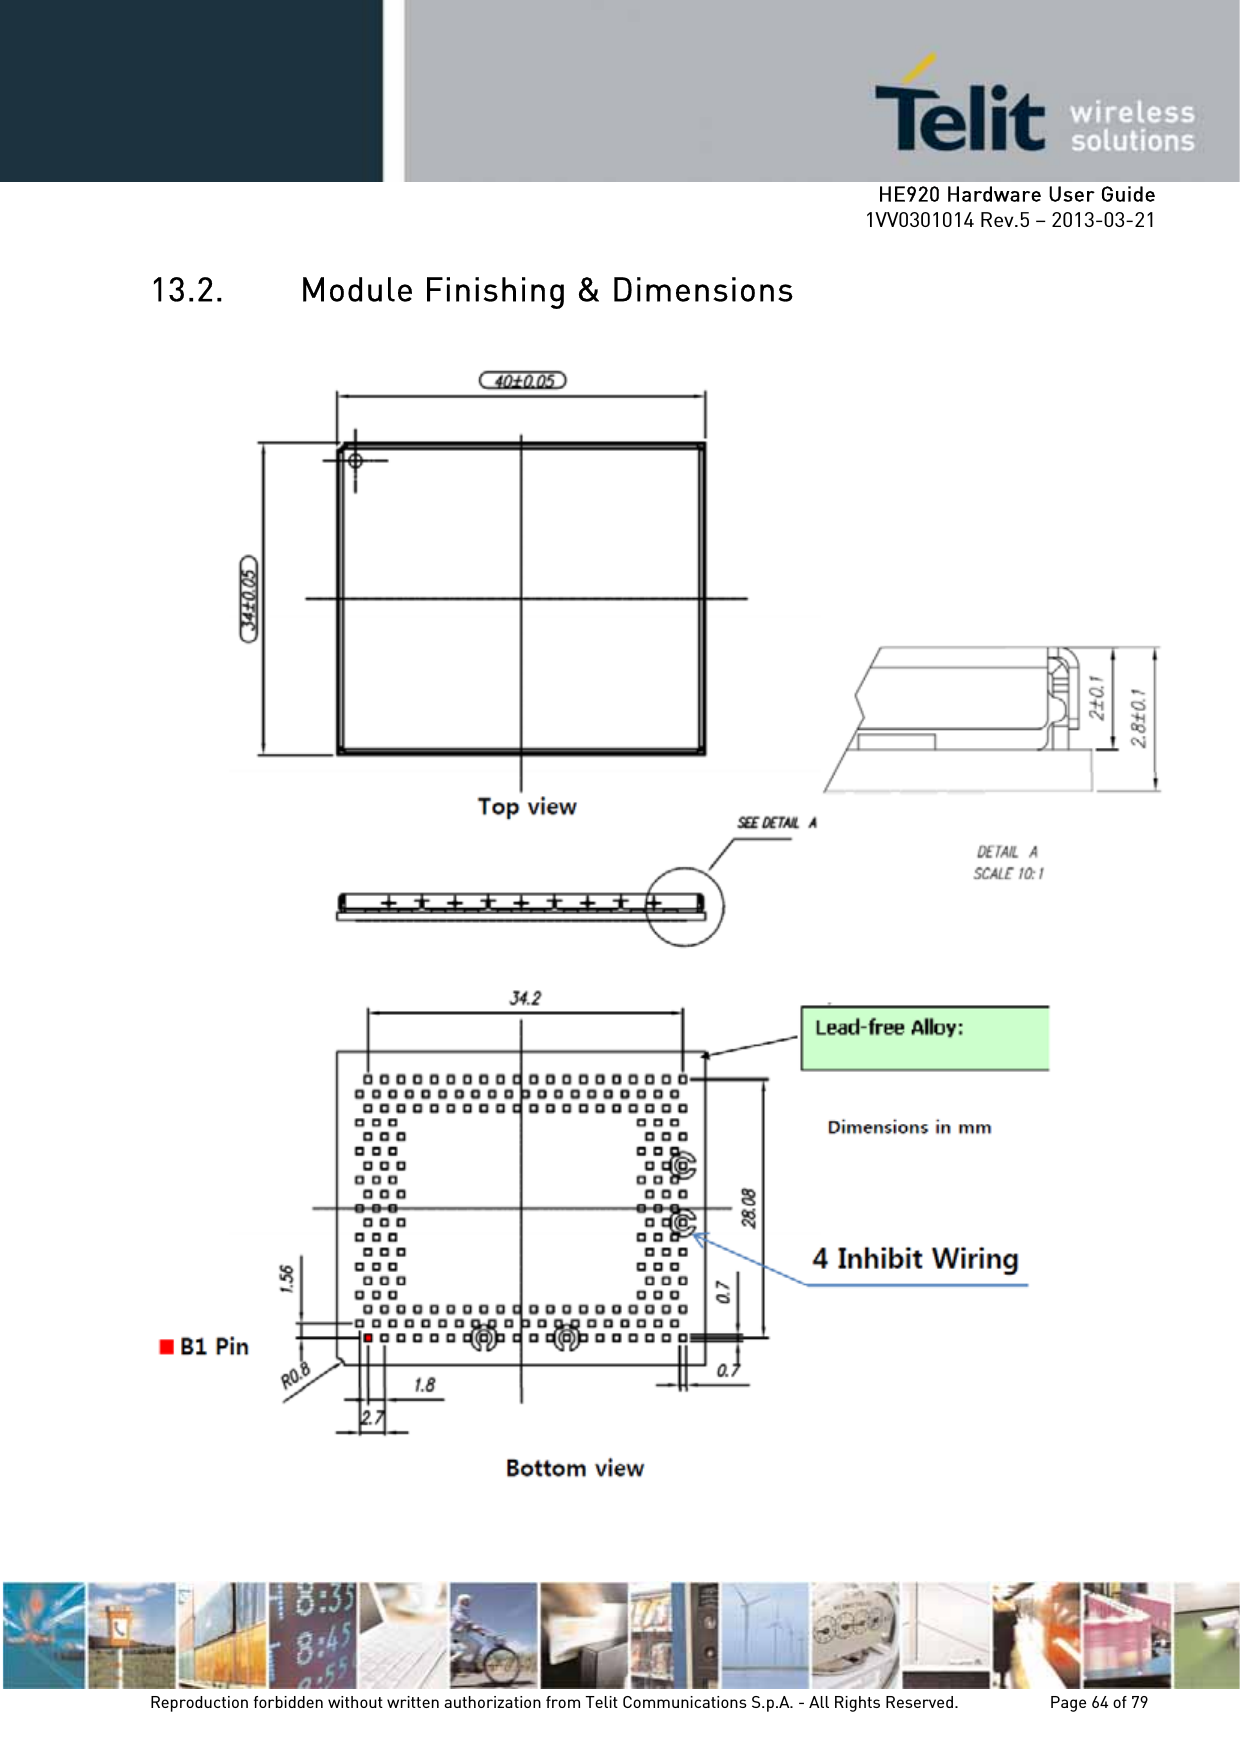     HE920 Hardware User Guide 1VV0301014 Rev.5 – 2013-03-21 Reproduction forbidden without written authorization from Telit Communications S.p.A. - All Rights Reserved.    Page 64 of 79  13.2. Module Finishing &amp; Dimensions     